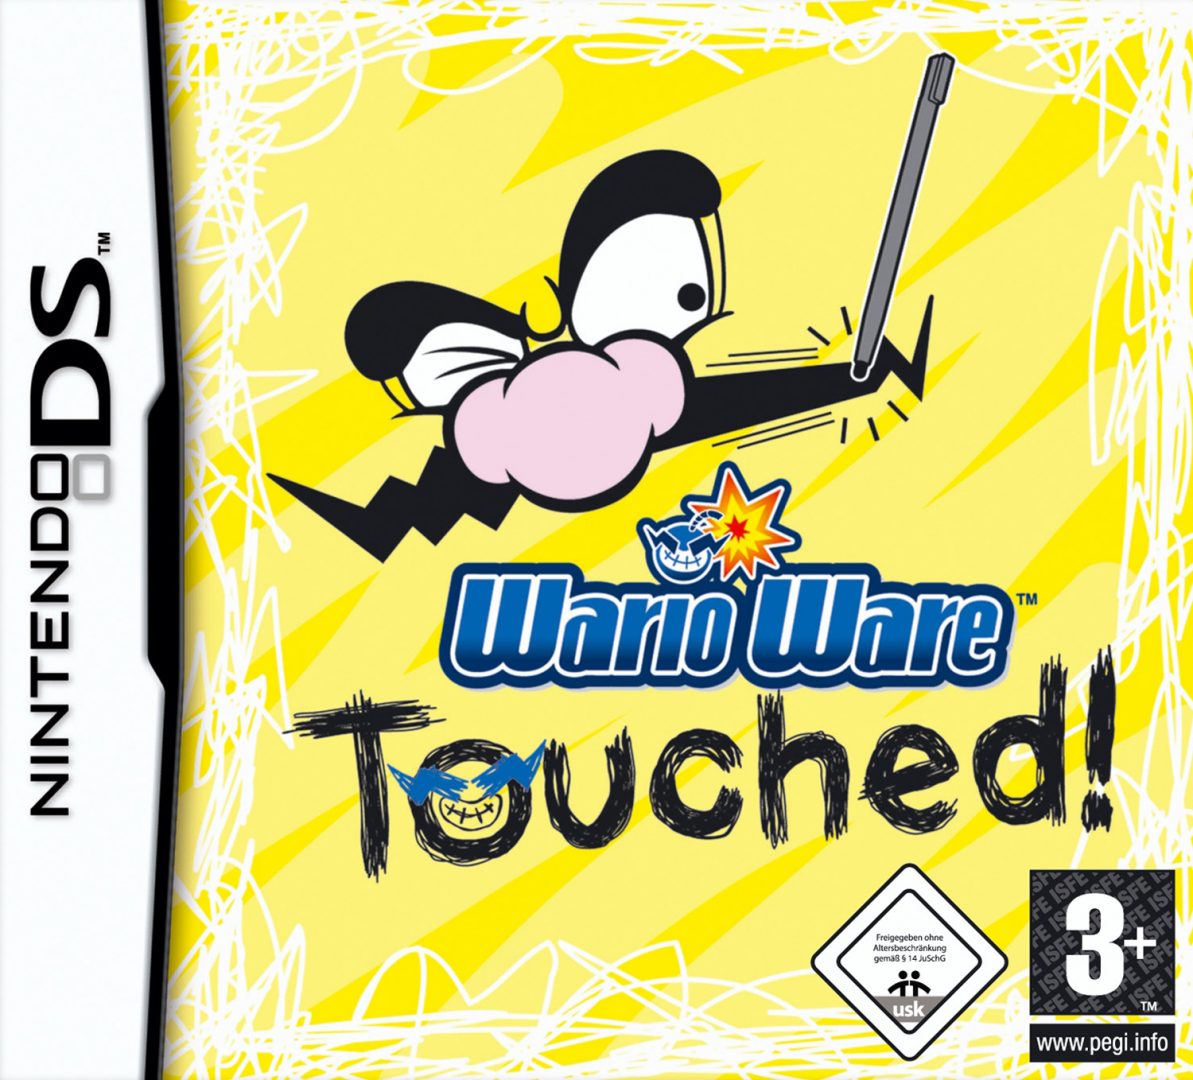 The coverart image of WarioWare: Touched!